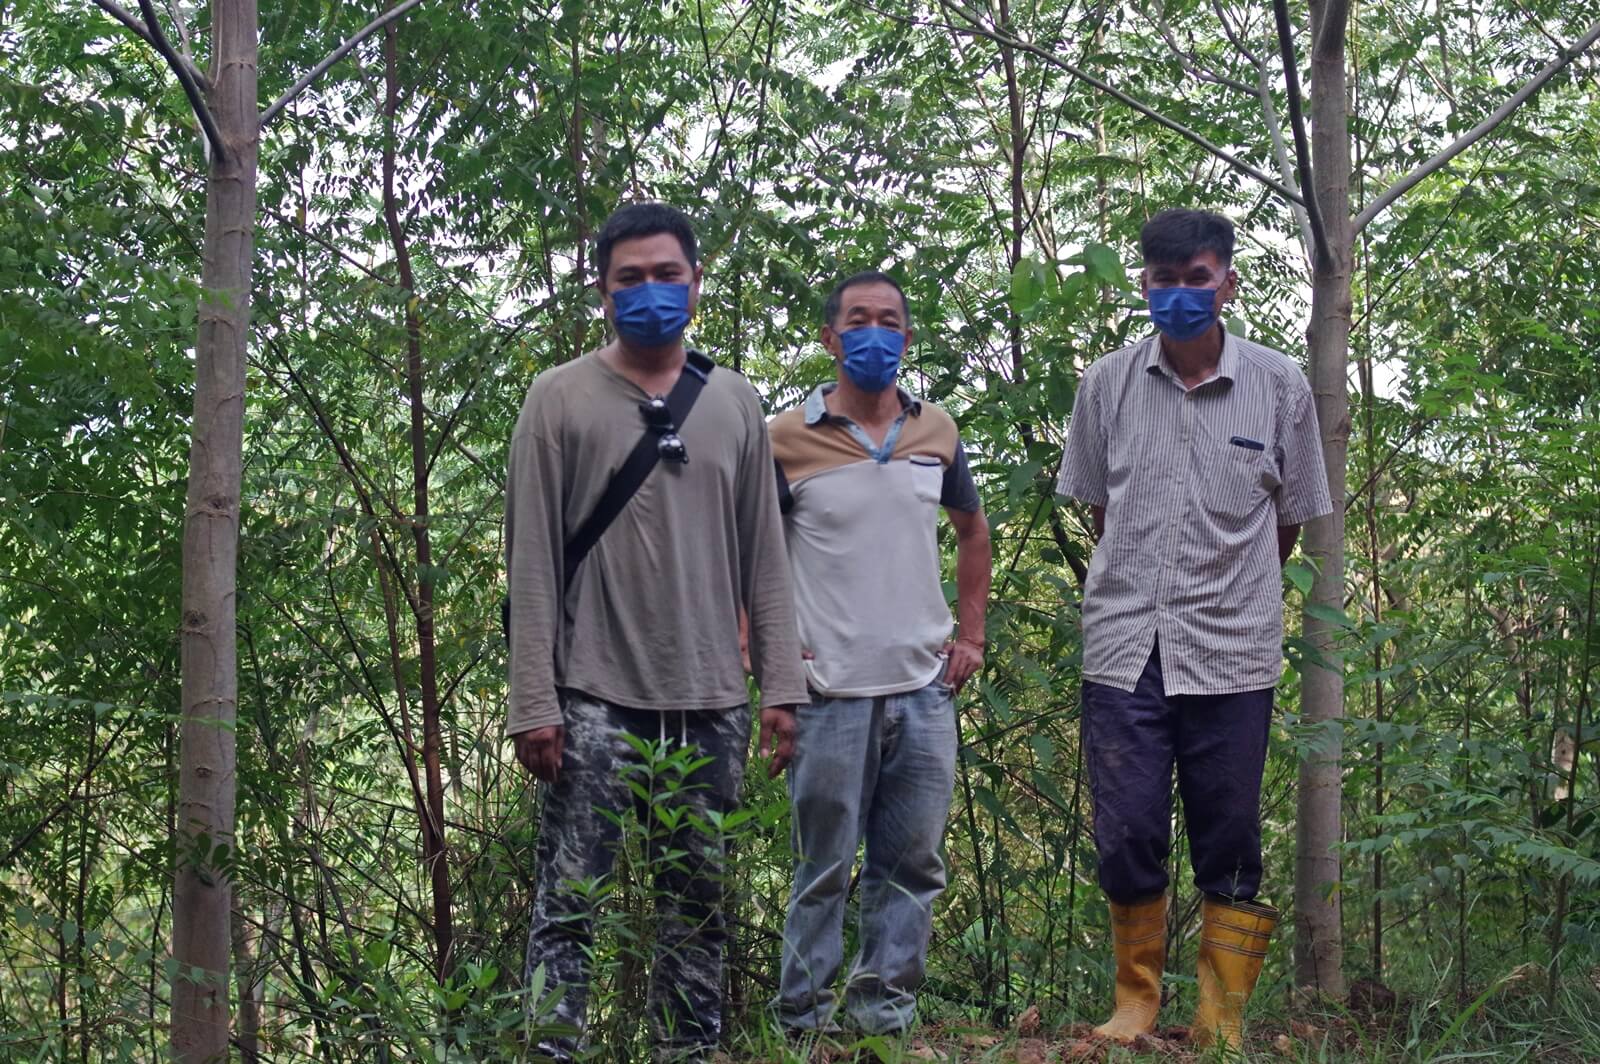 Forest plantations are tree farms where planters would clear the site and replant with a fast-growing tree species. In Kelantan, planters like batai (Falcataria moluccana, also Paraserianthes falcataria) because it needs little care. From left: planters Tiun Kian Joo, Sia Beng Hock, and Tan Wai Ther. (YH Law)